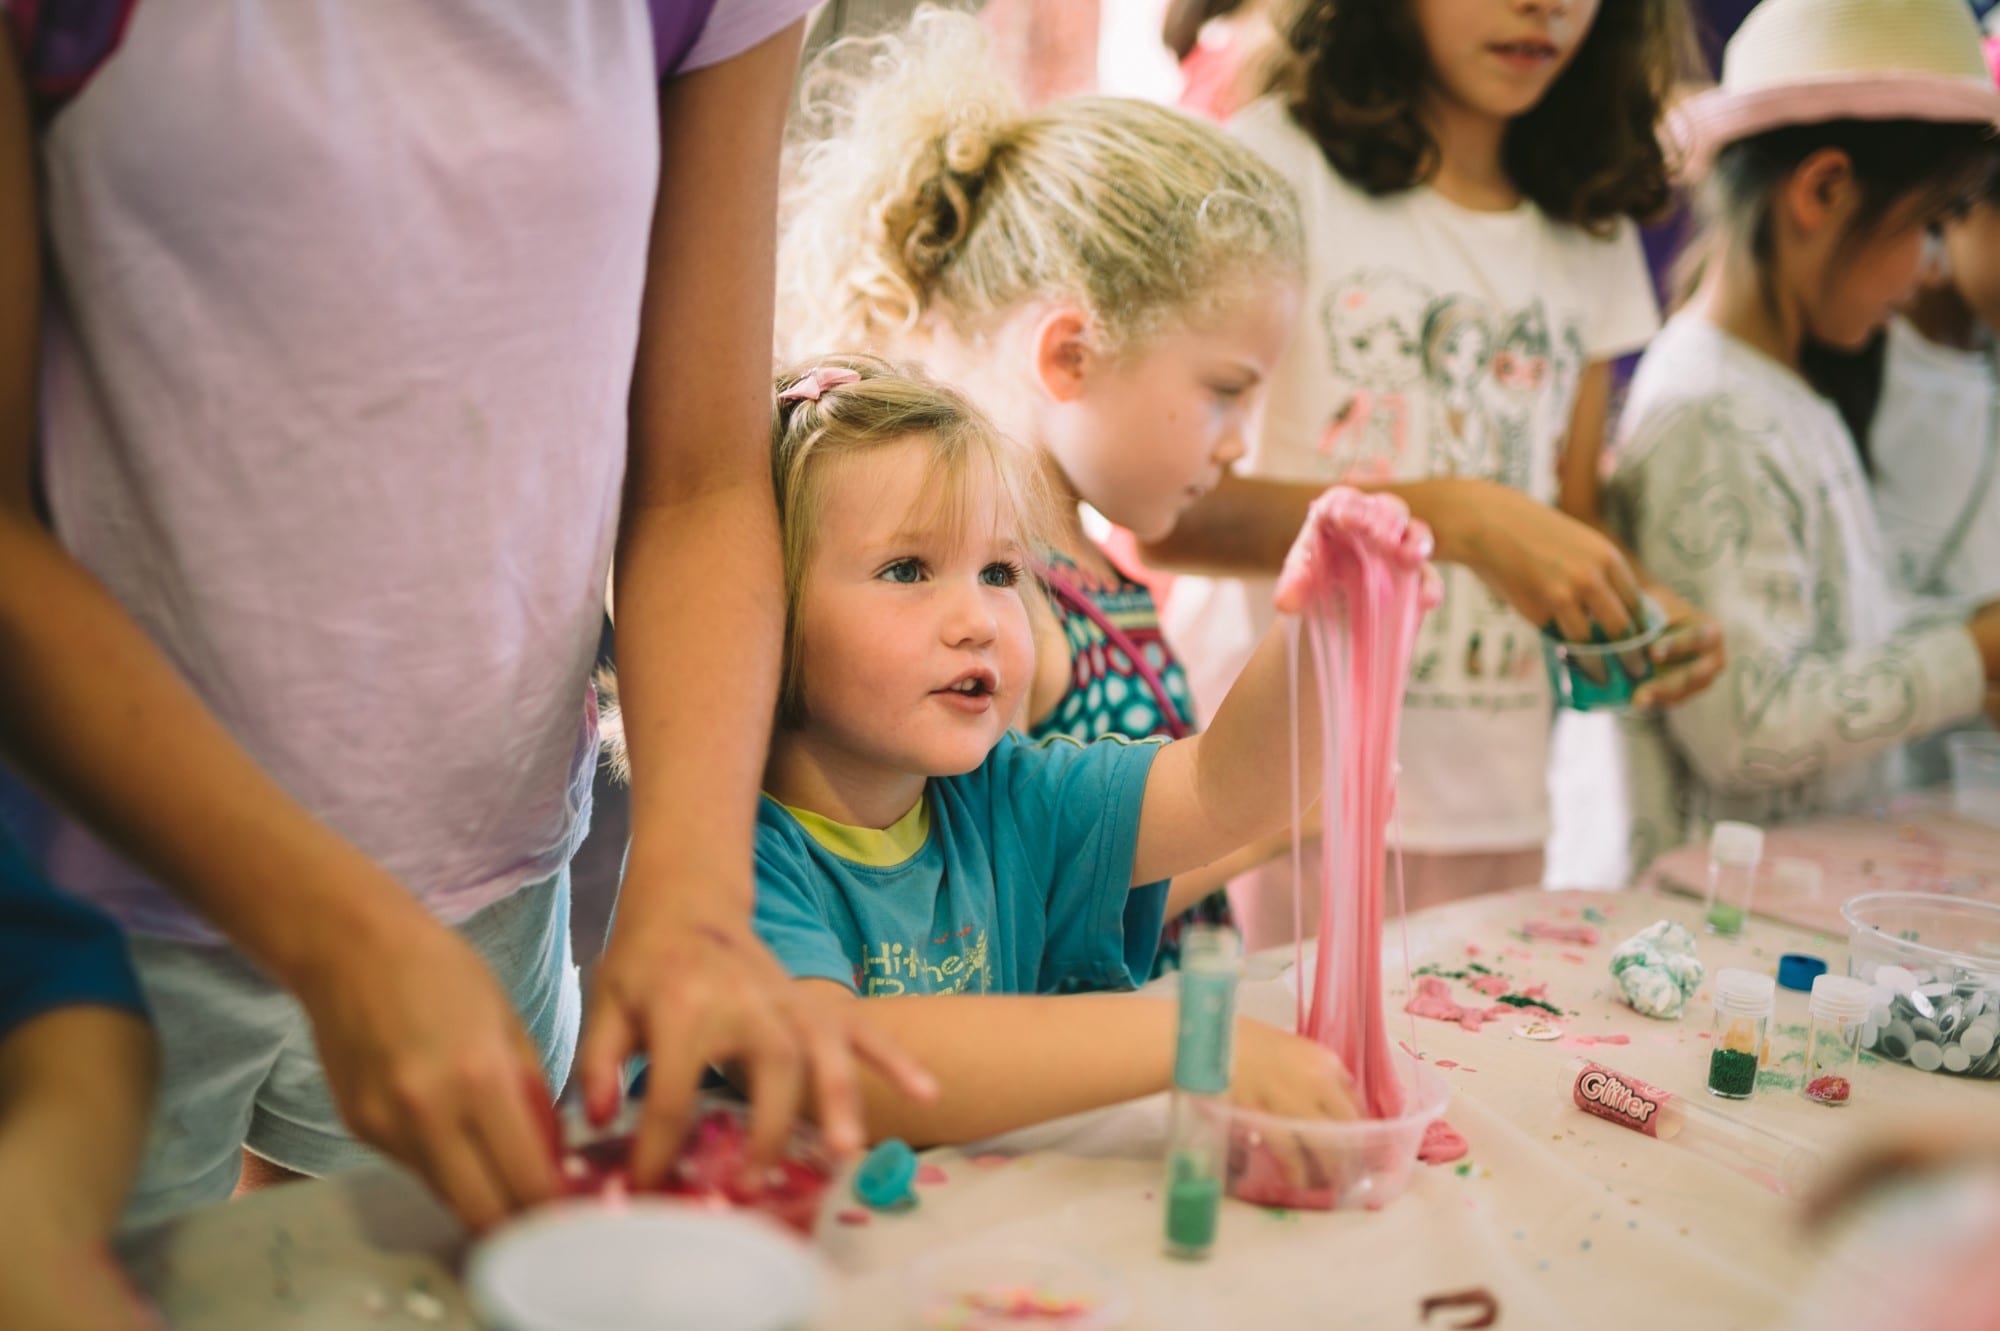 Slime weekend at MOTAT - AUCKLAND FOR KIDS